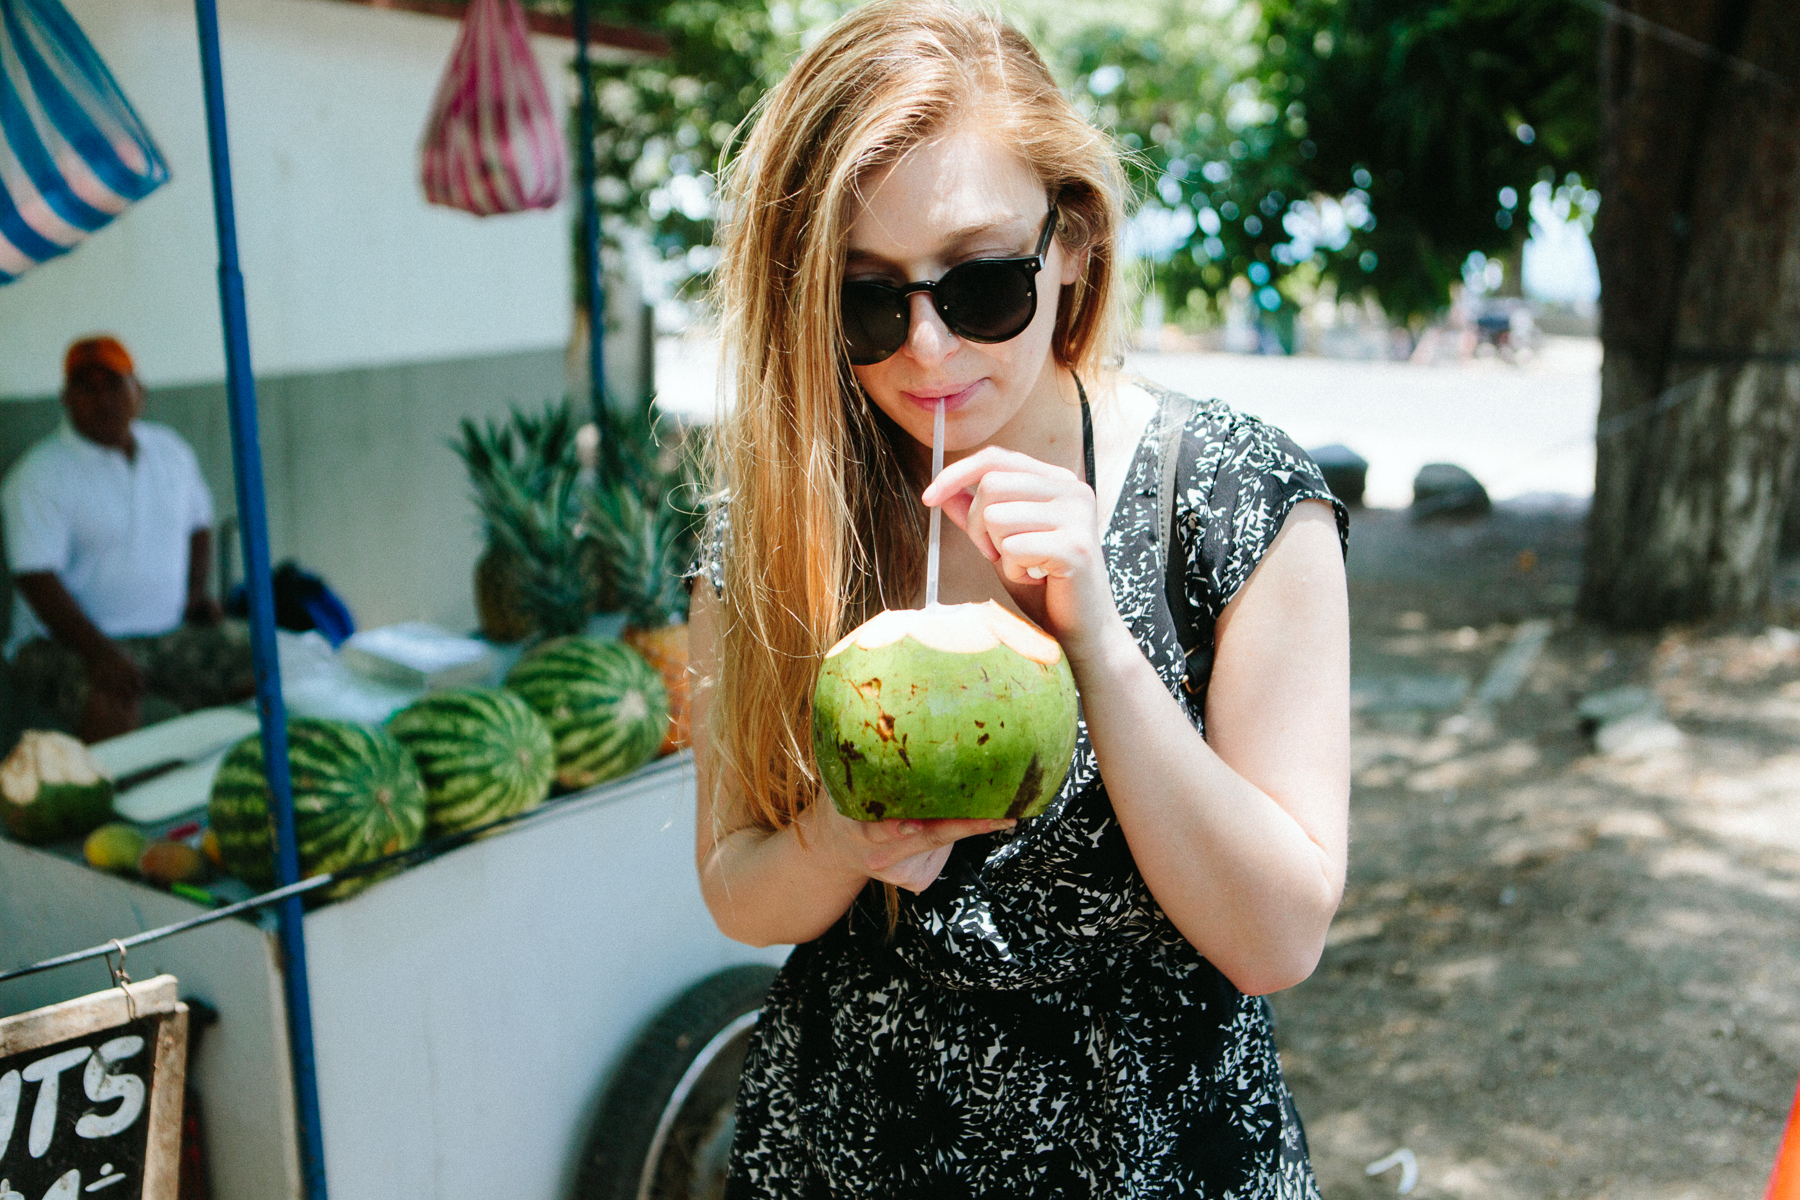 From Here to There: Exploring Costa Rica With Singer/Songwriter VÉRITÉ